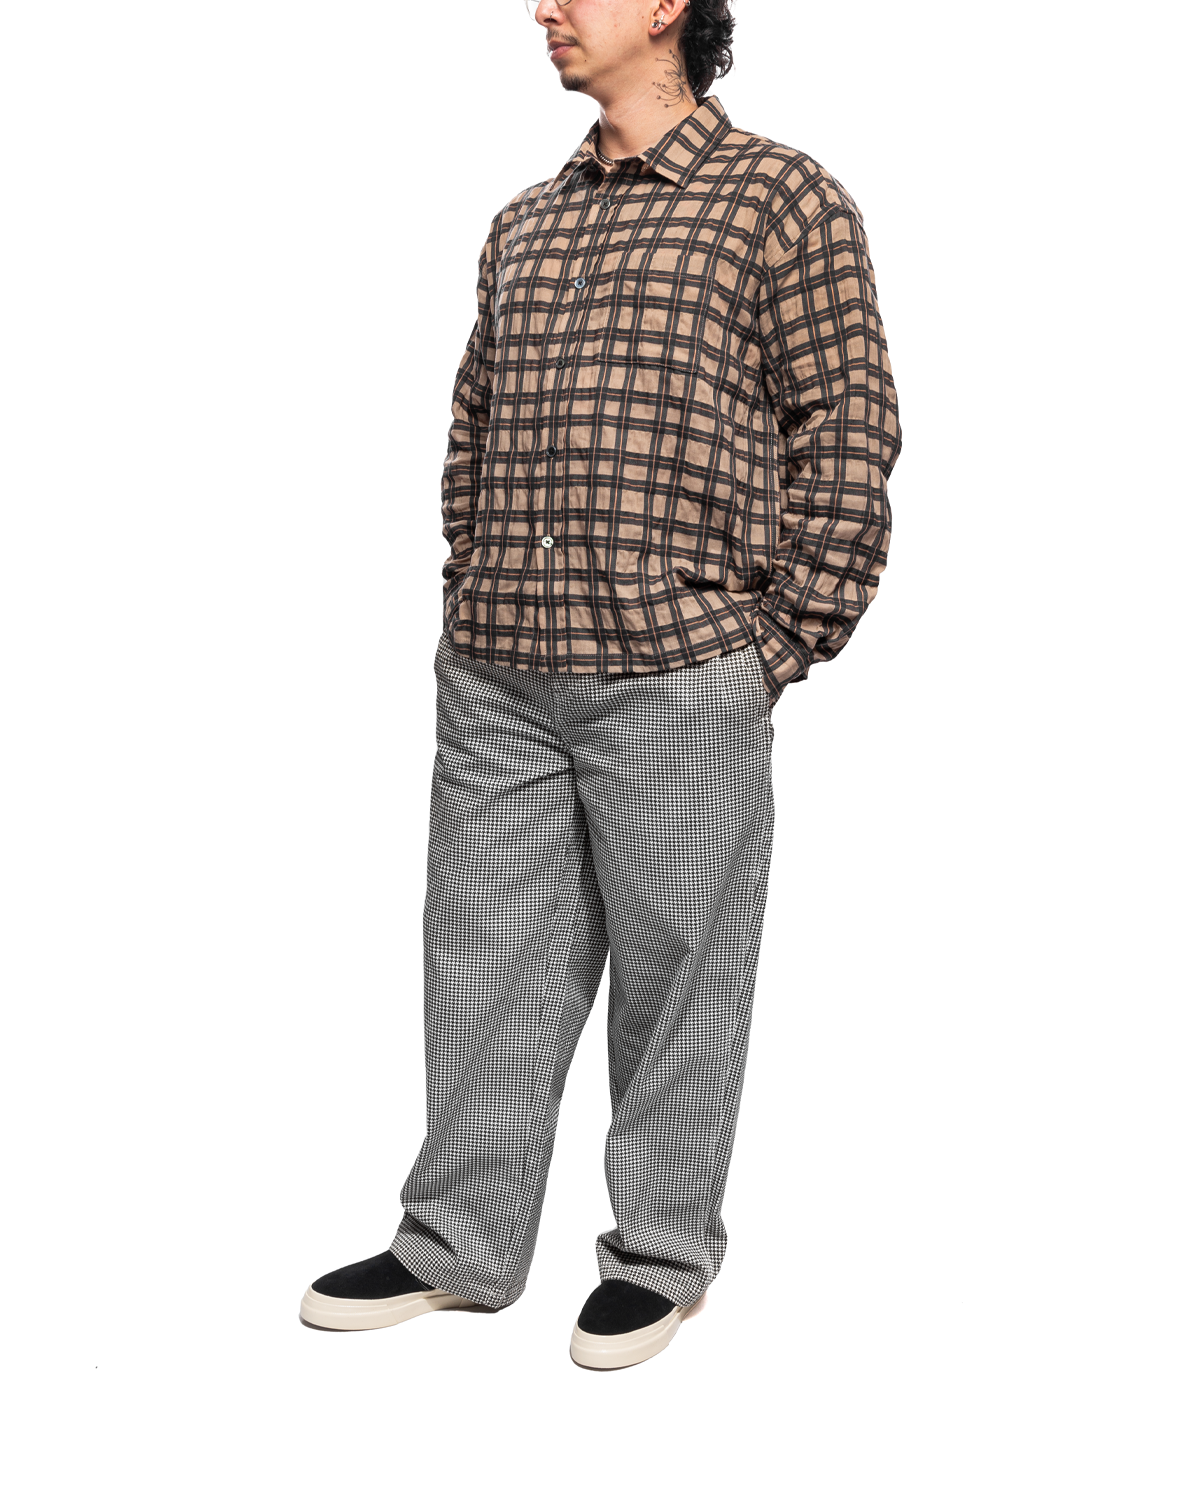 Workgear Trouser Twill Houndstooth